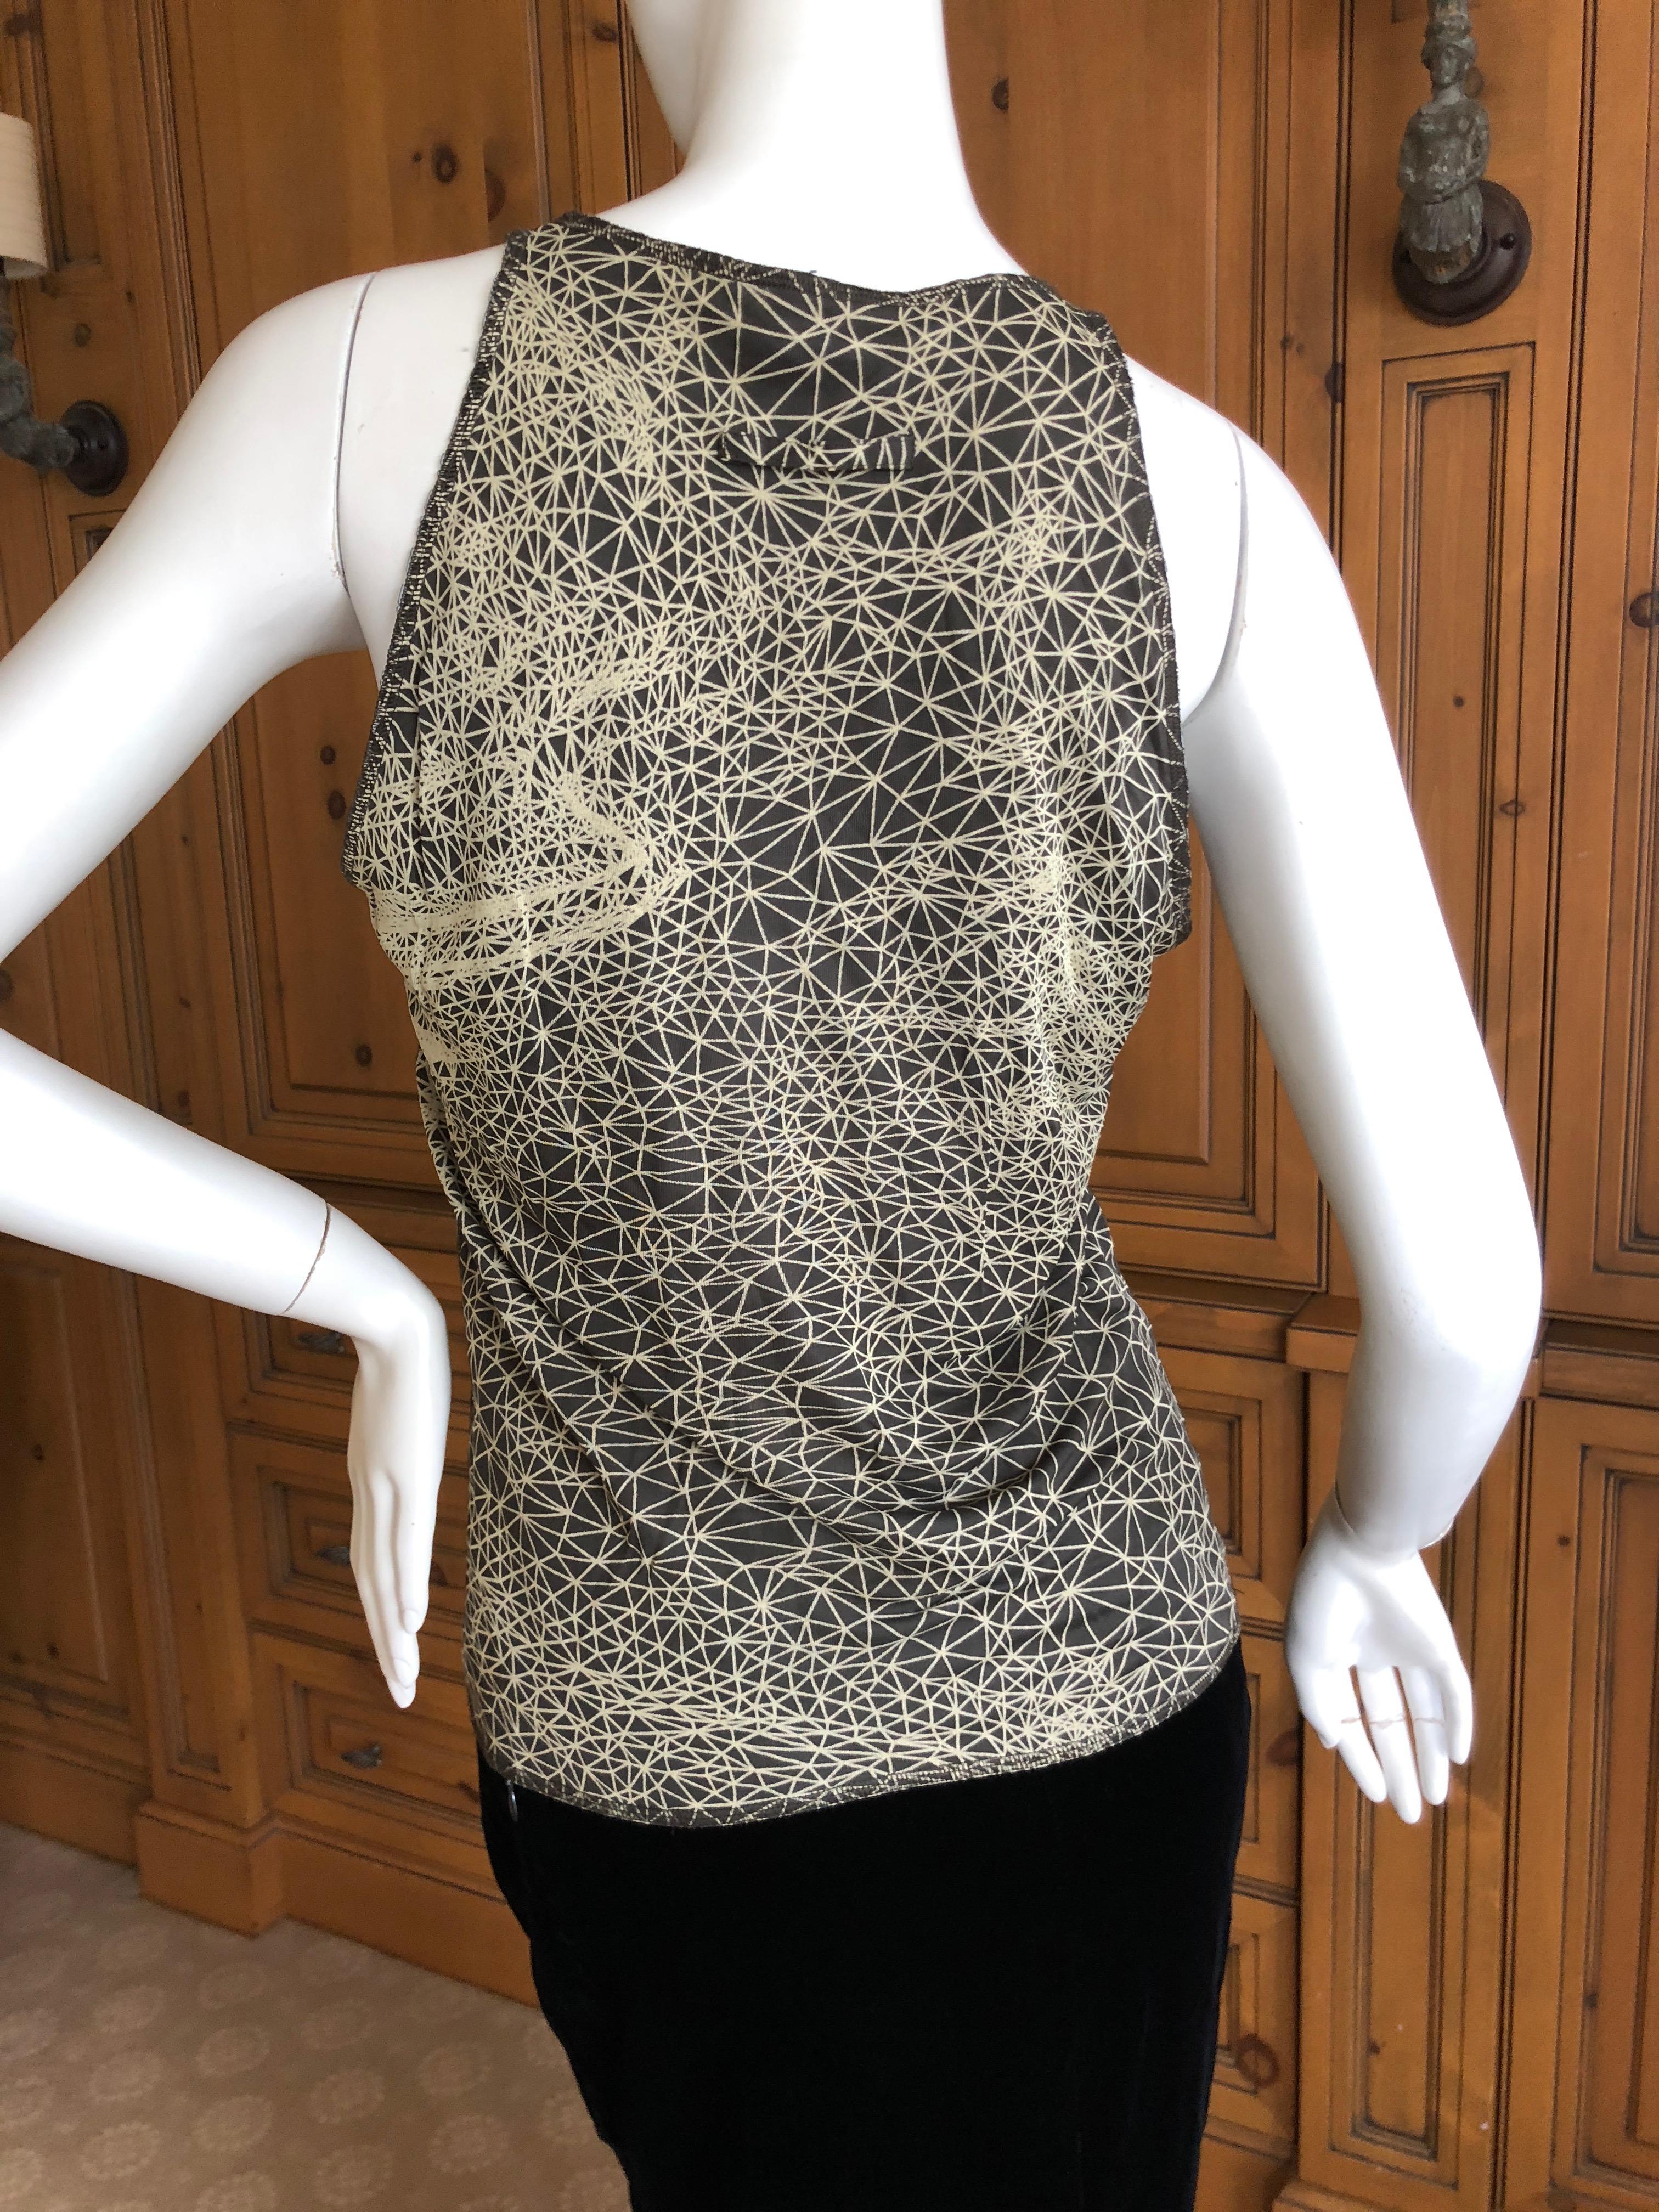 Jean Paul Gaultier Maille Femme Celestial Face Print Tank Top Size 34 In Excellent Condition For Sale In Cloverdale, CA